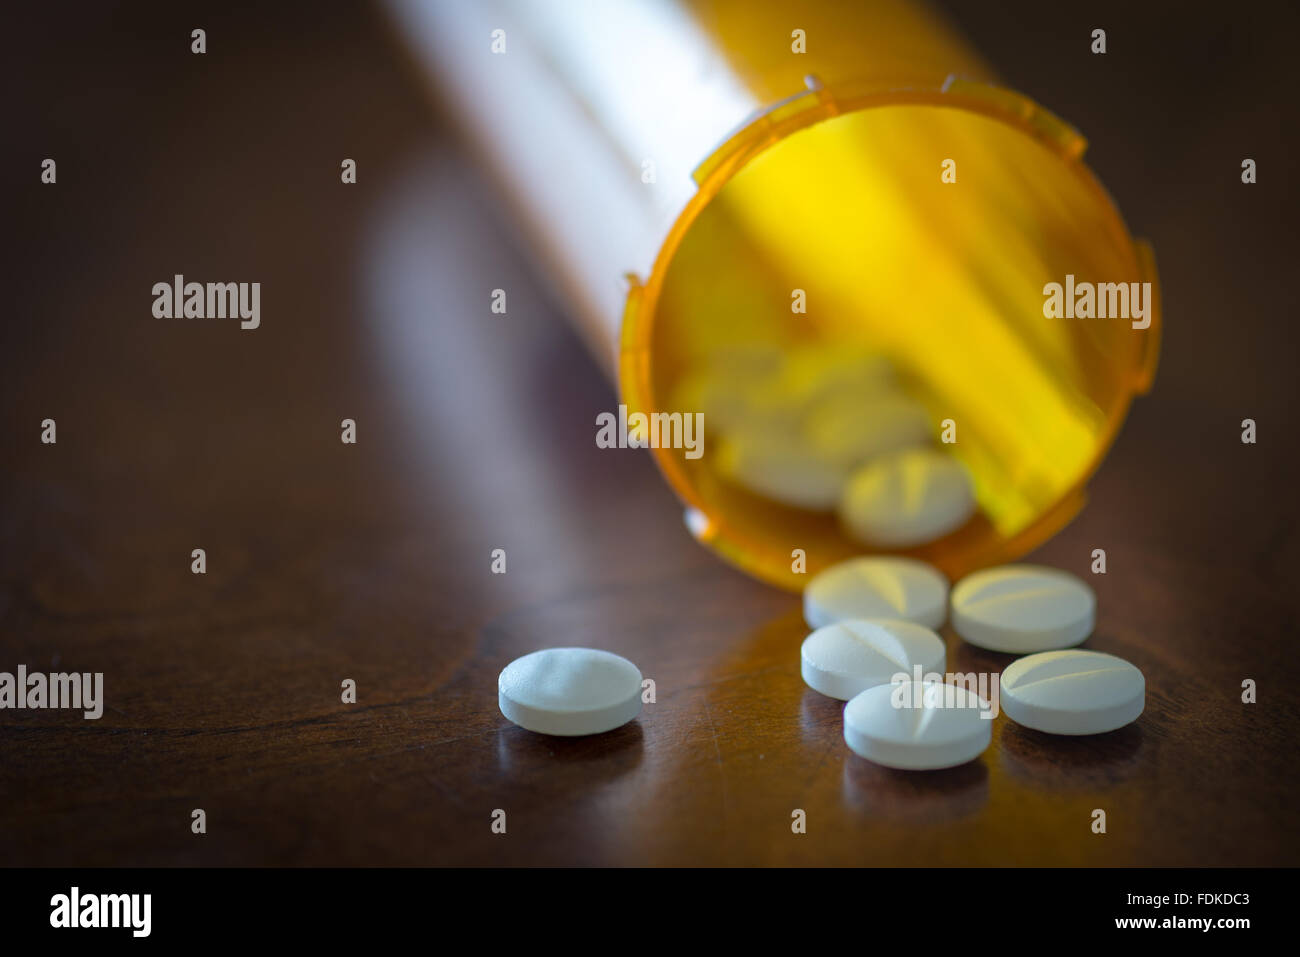 white pills being knocked out of their orange container on top the brown table surface Stock Photo